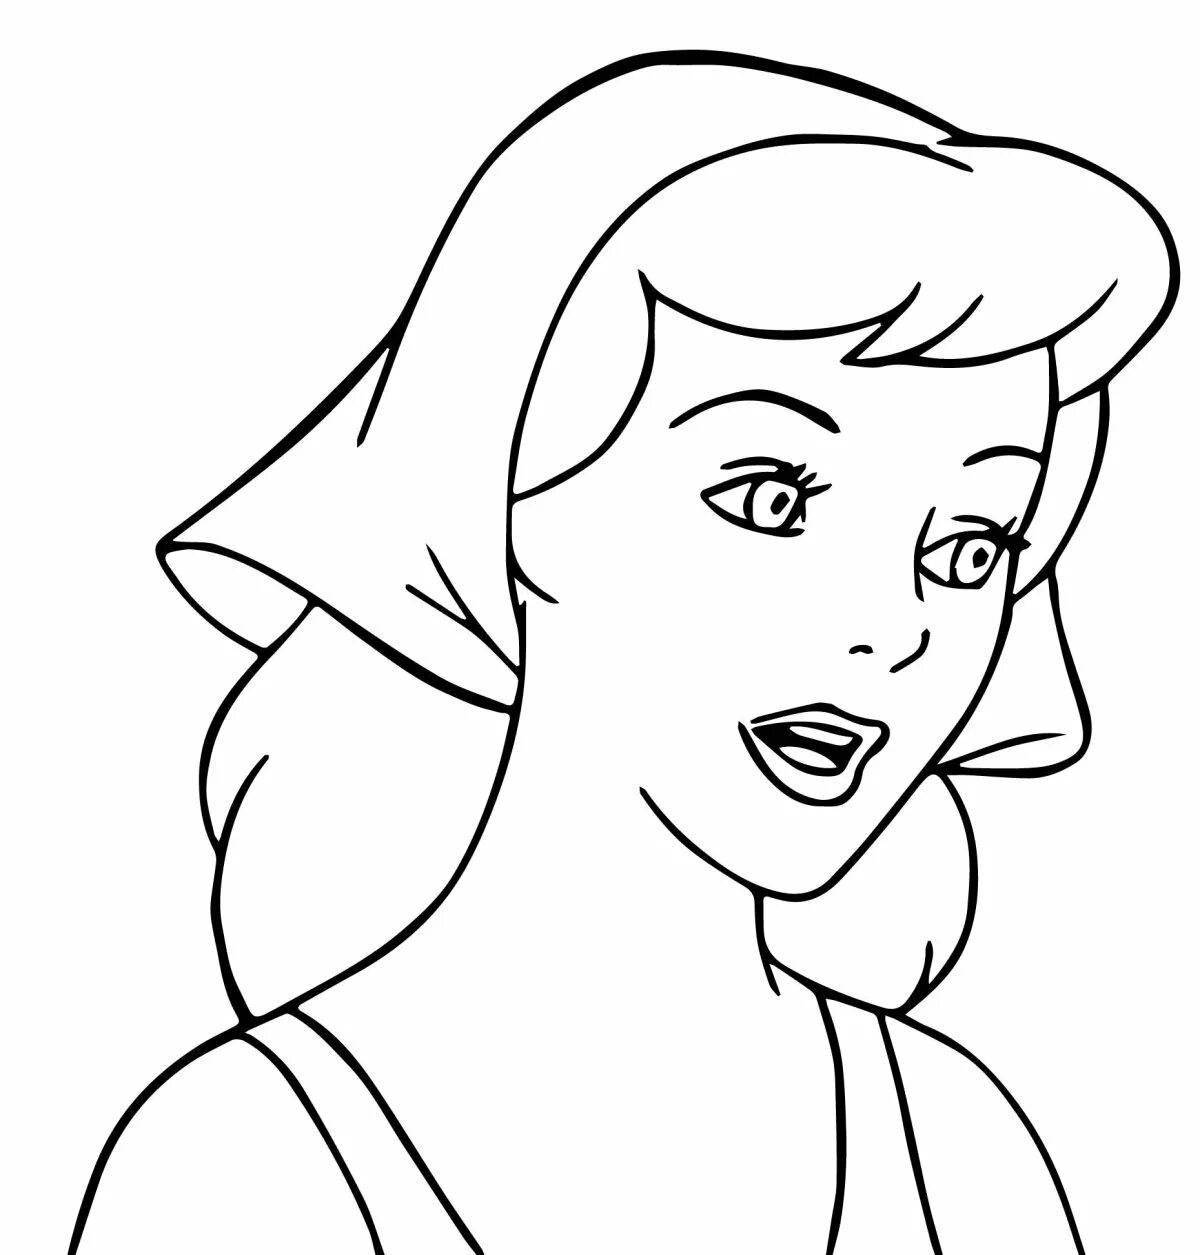 Amazing coloring book portrait of mother for children 6-7 years old